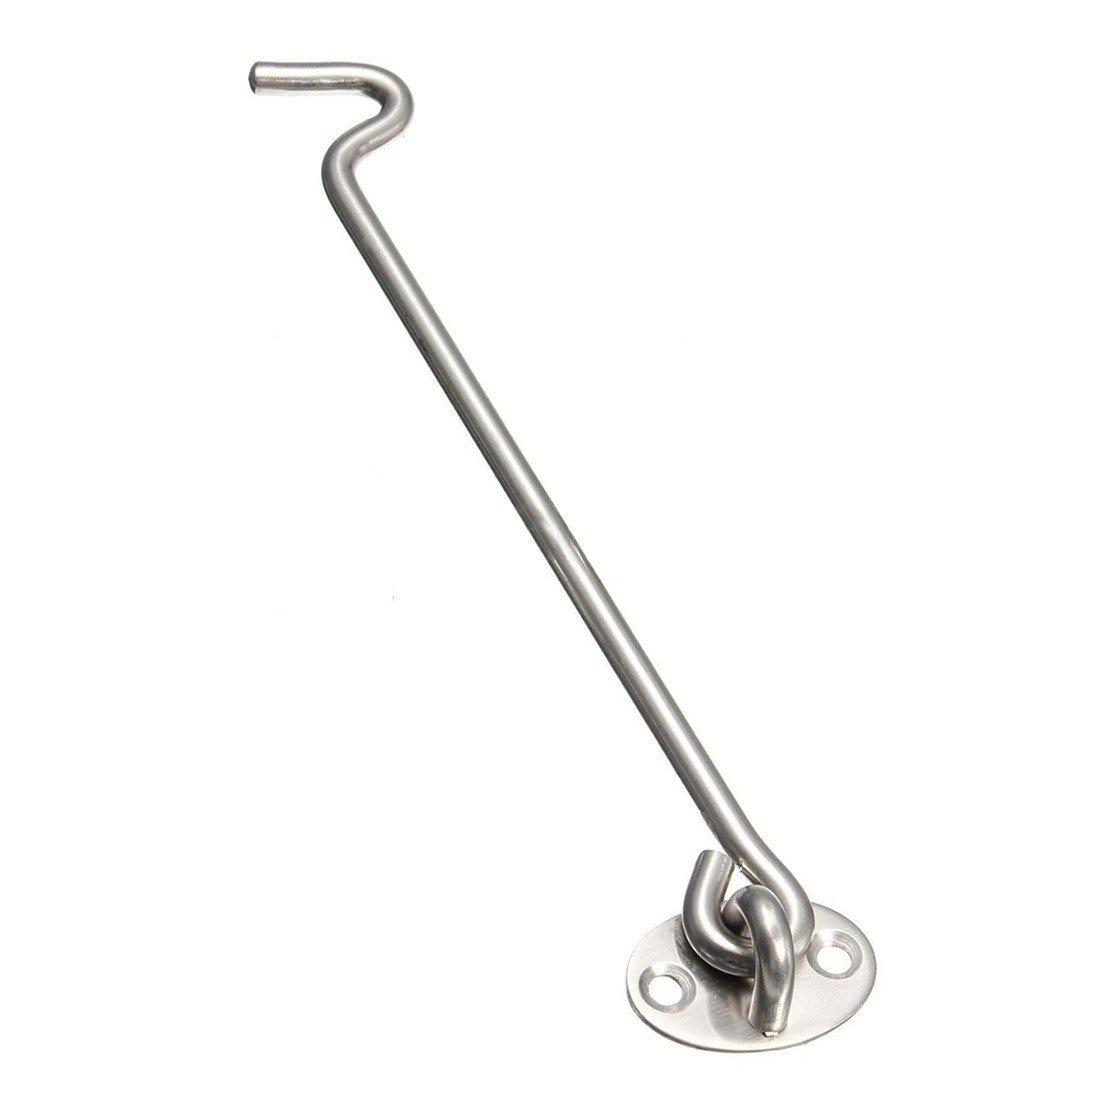 Stainless Steel Heavy Duty Cabin Hook and Eye Lock for Shed, Gate or Garage Door (200 mm/8 inch)